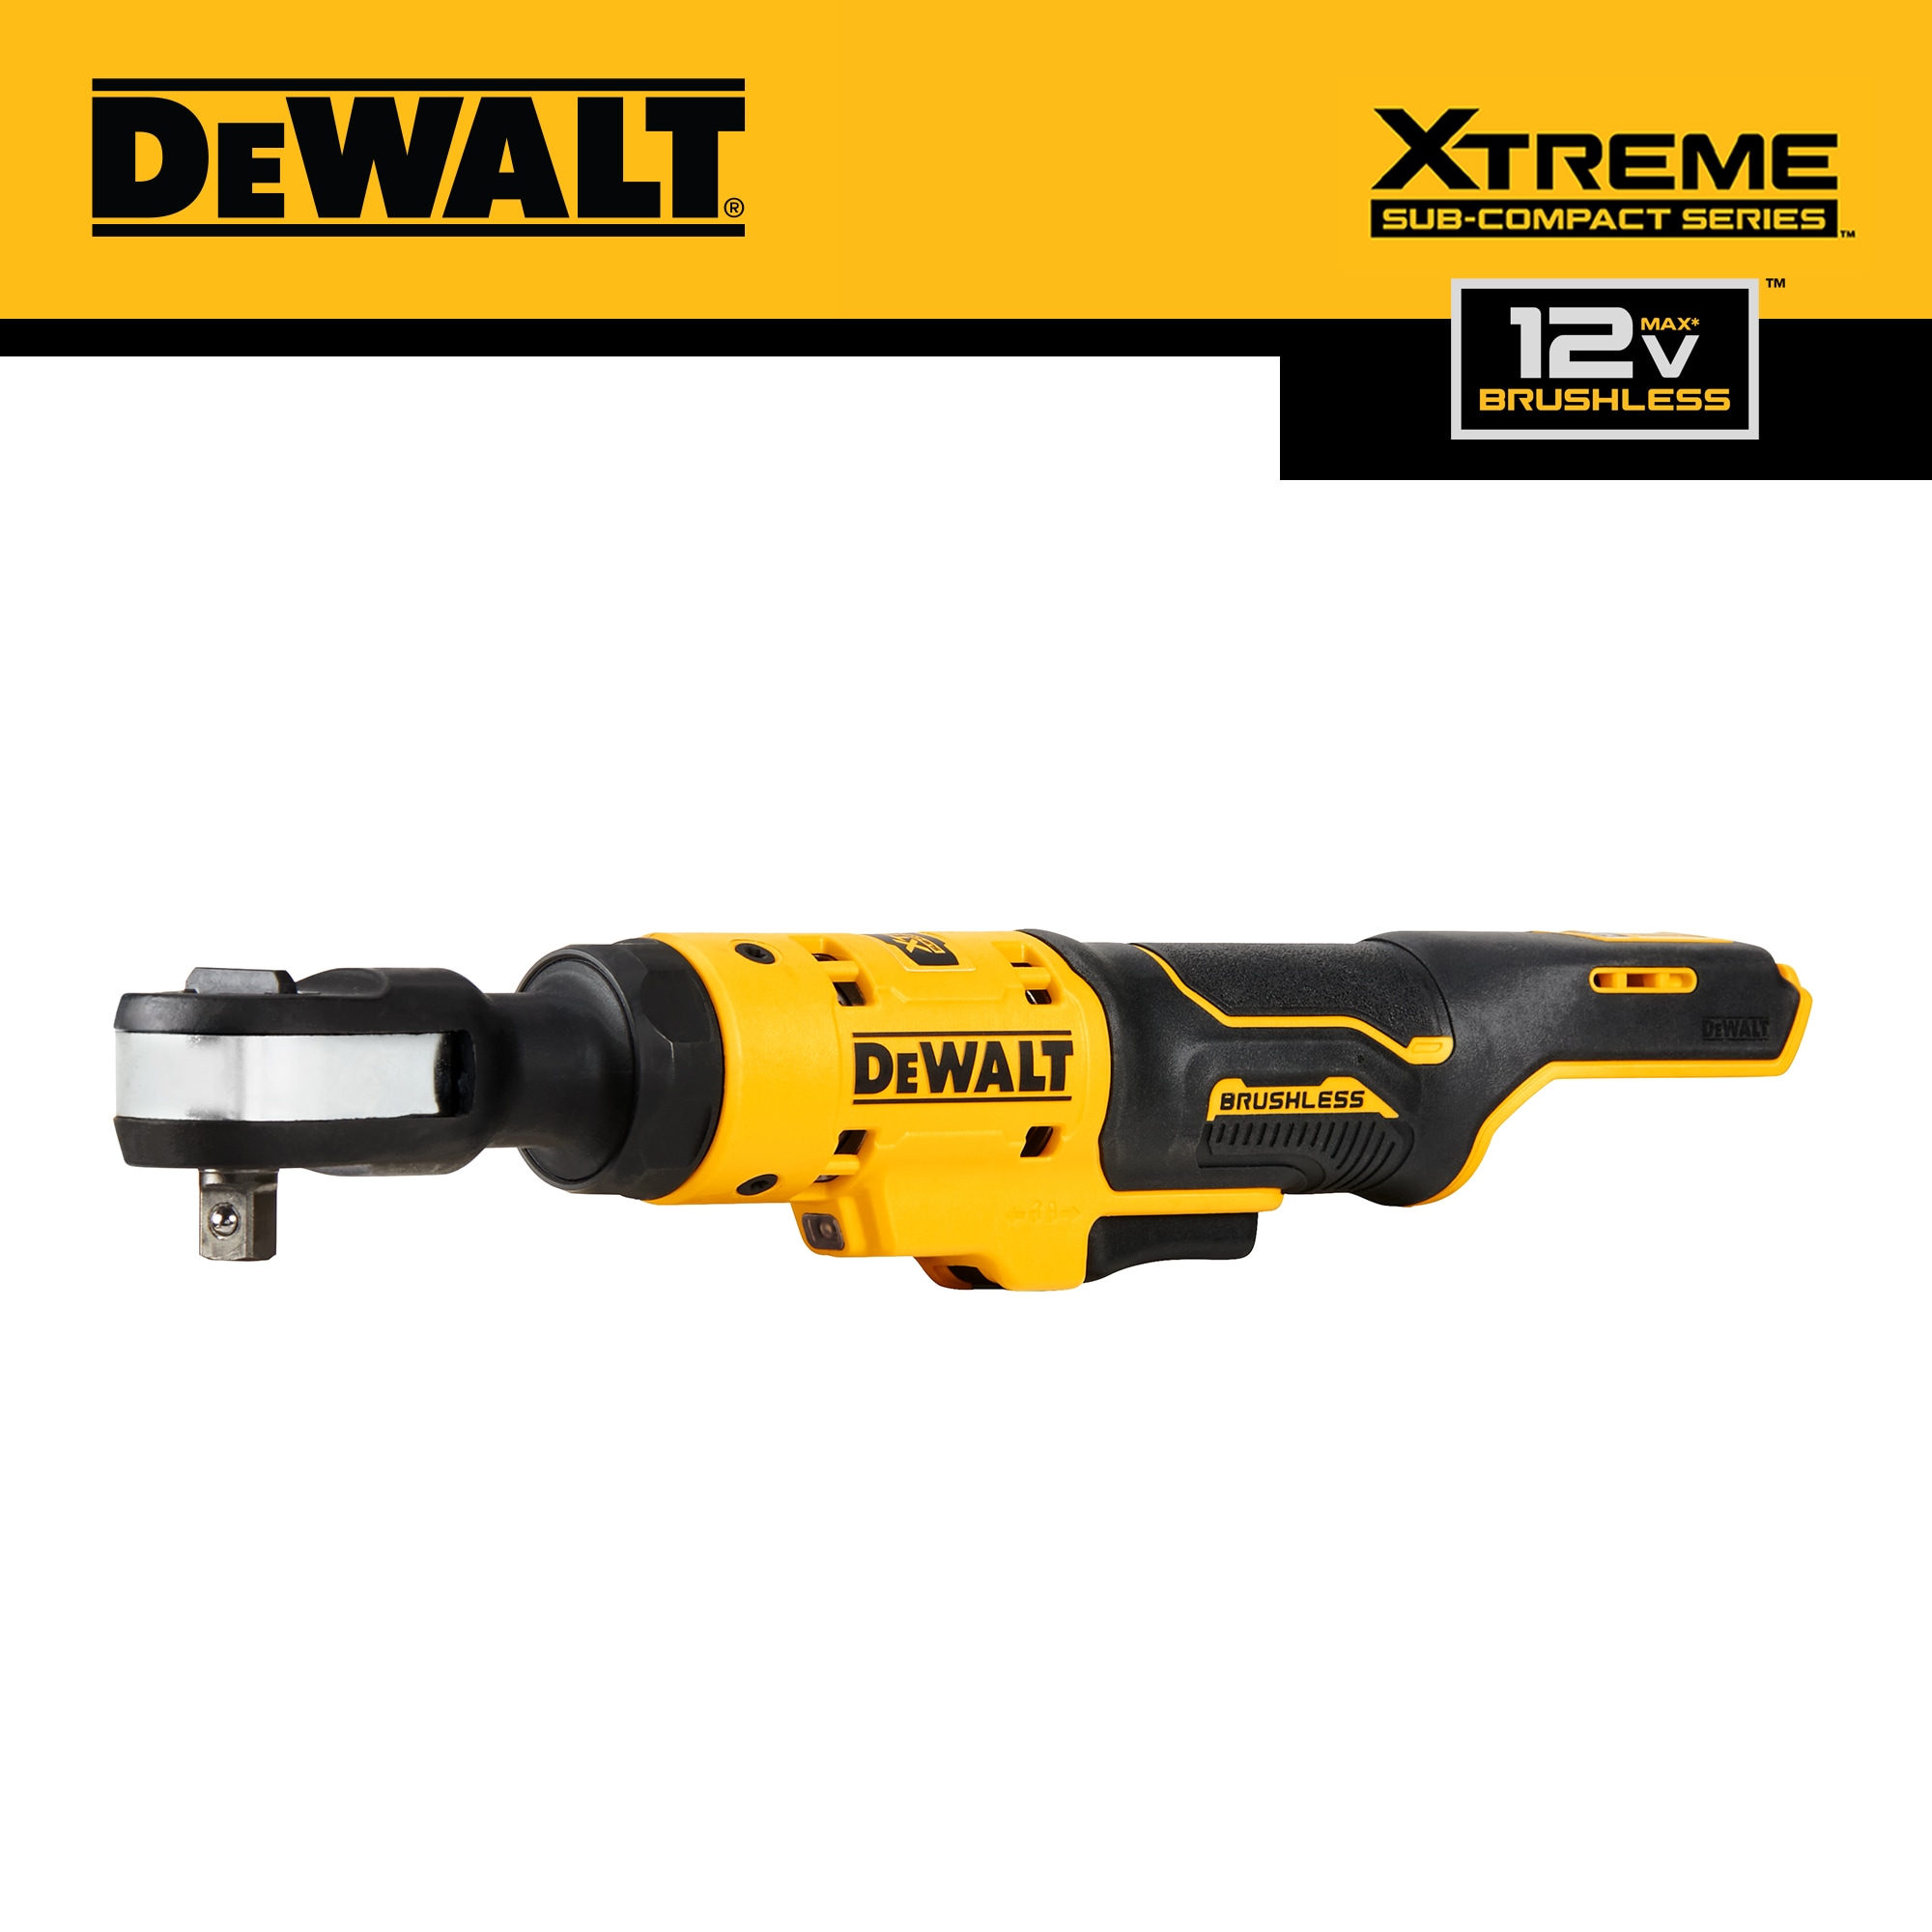 DEWALT XTREME 12-volt Max Variable Speed Brushless 3/8-in Drive